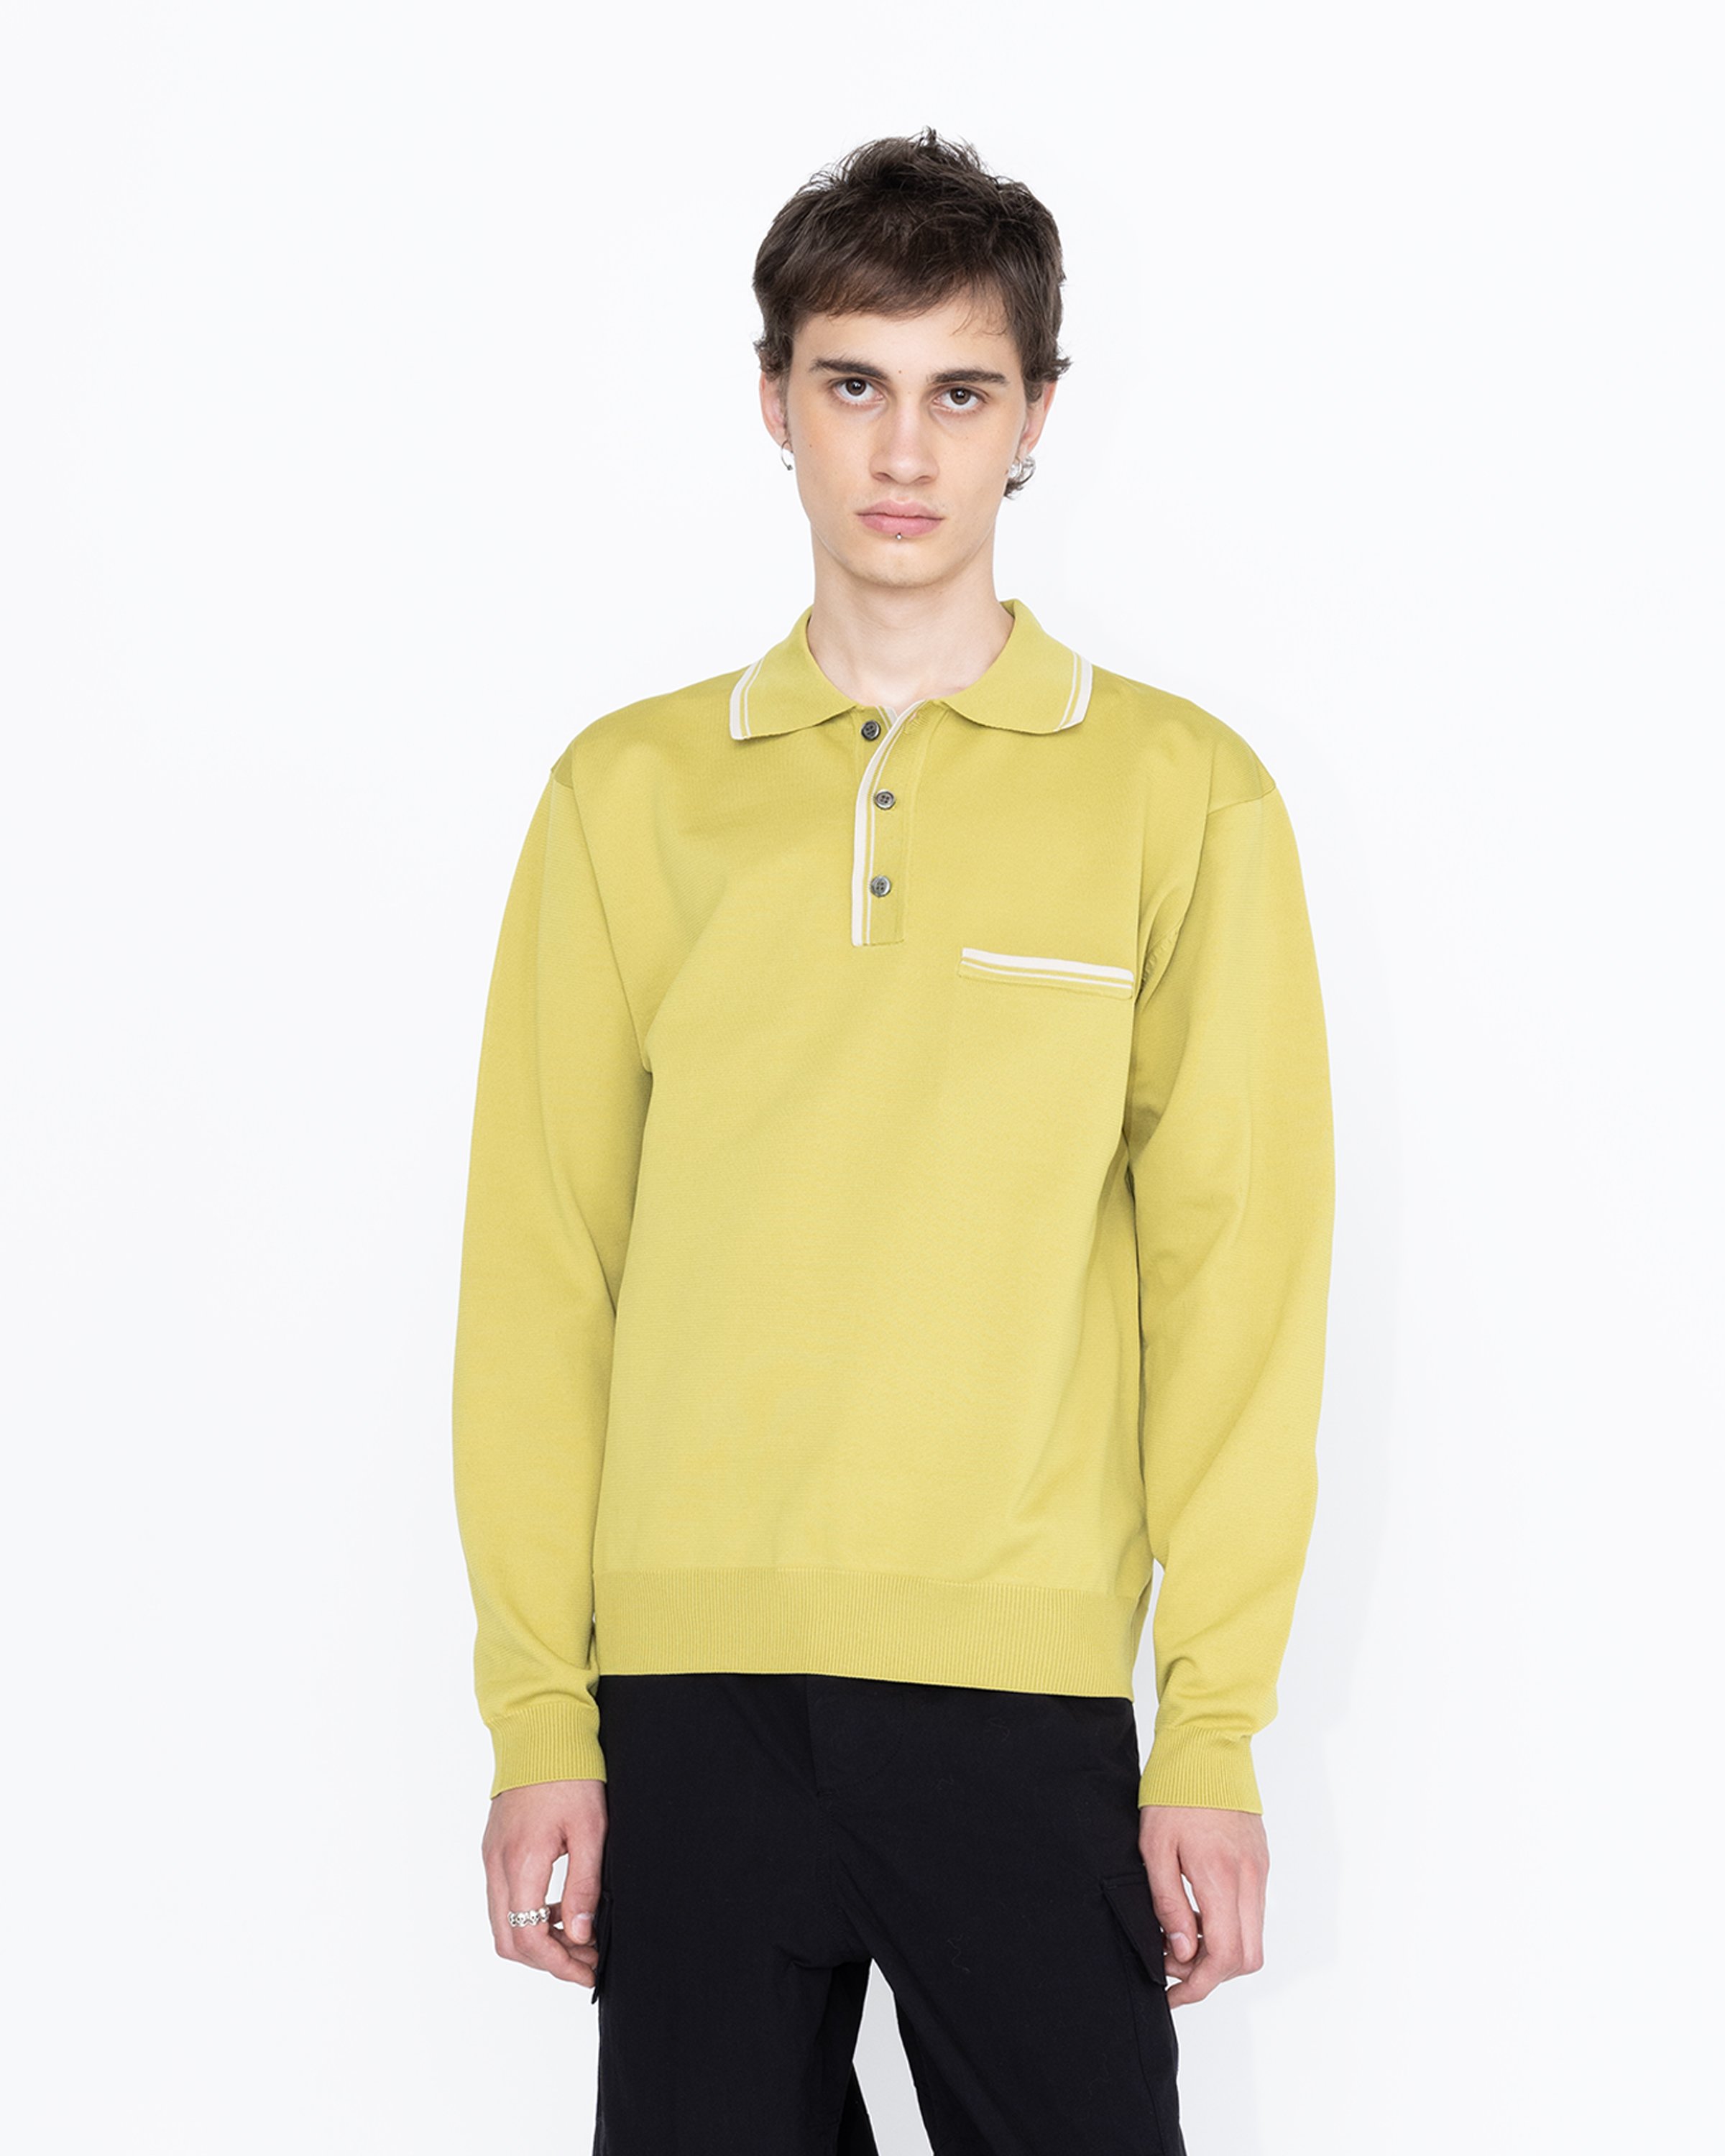 Highsnobiety HS05 - Long Sleeves Knit Polo Green - Clothing - Green - Image 3